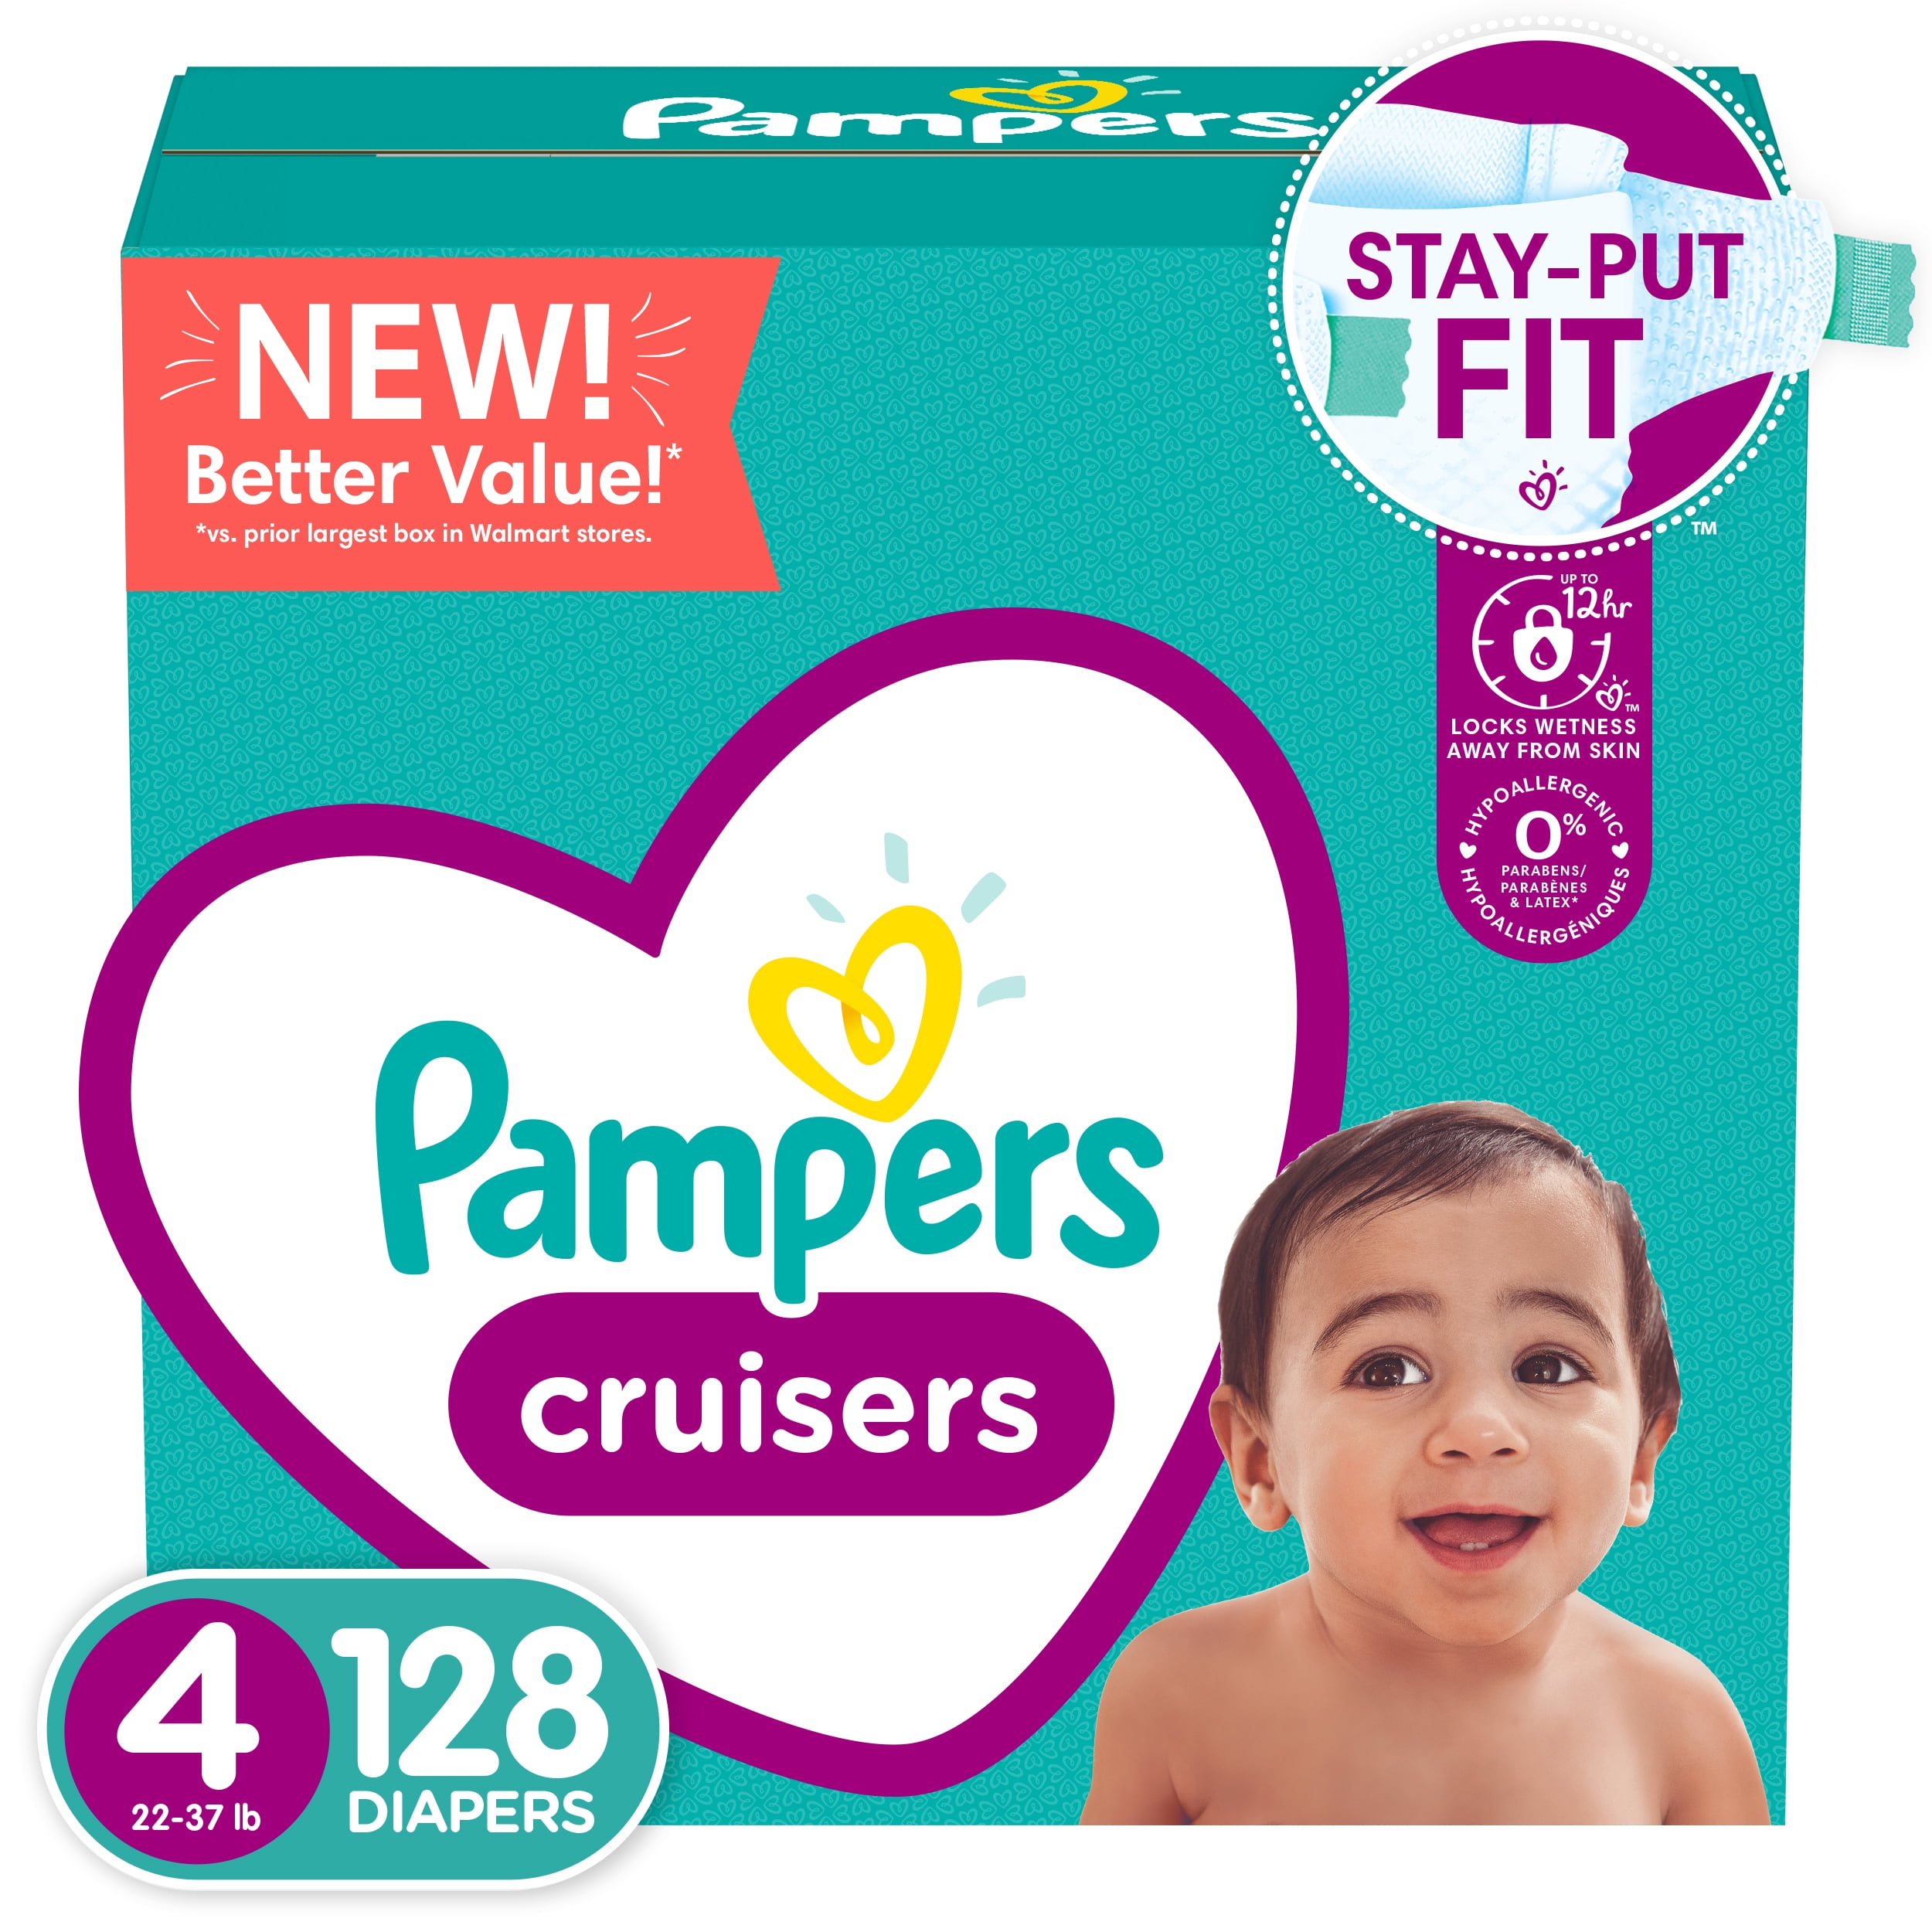 Pampers Cruisers Baby Diapers Size 7 Economy Pack Plus 88 Count NEW!